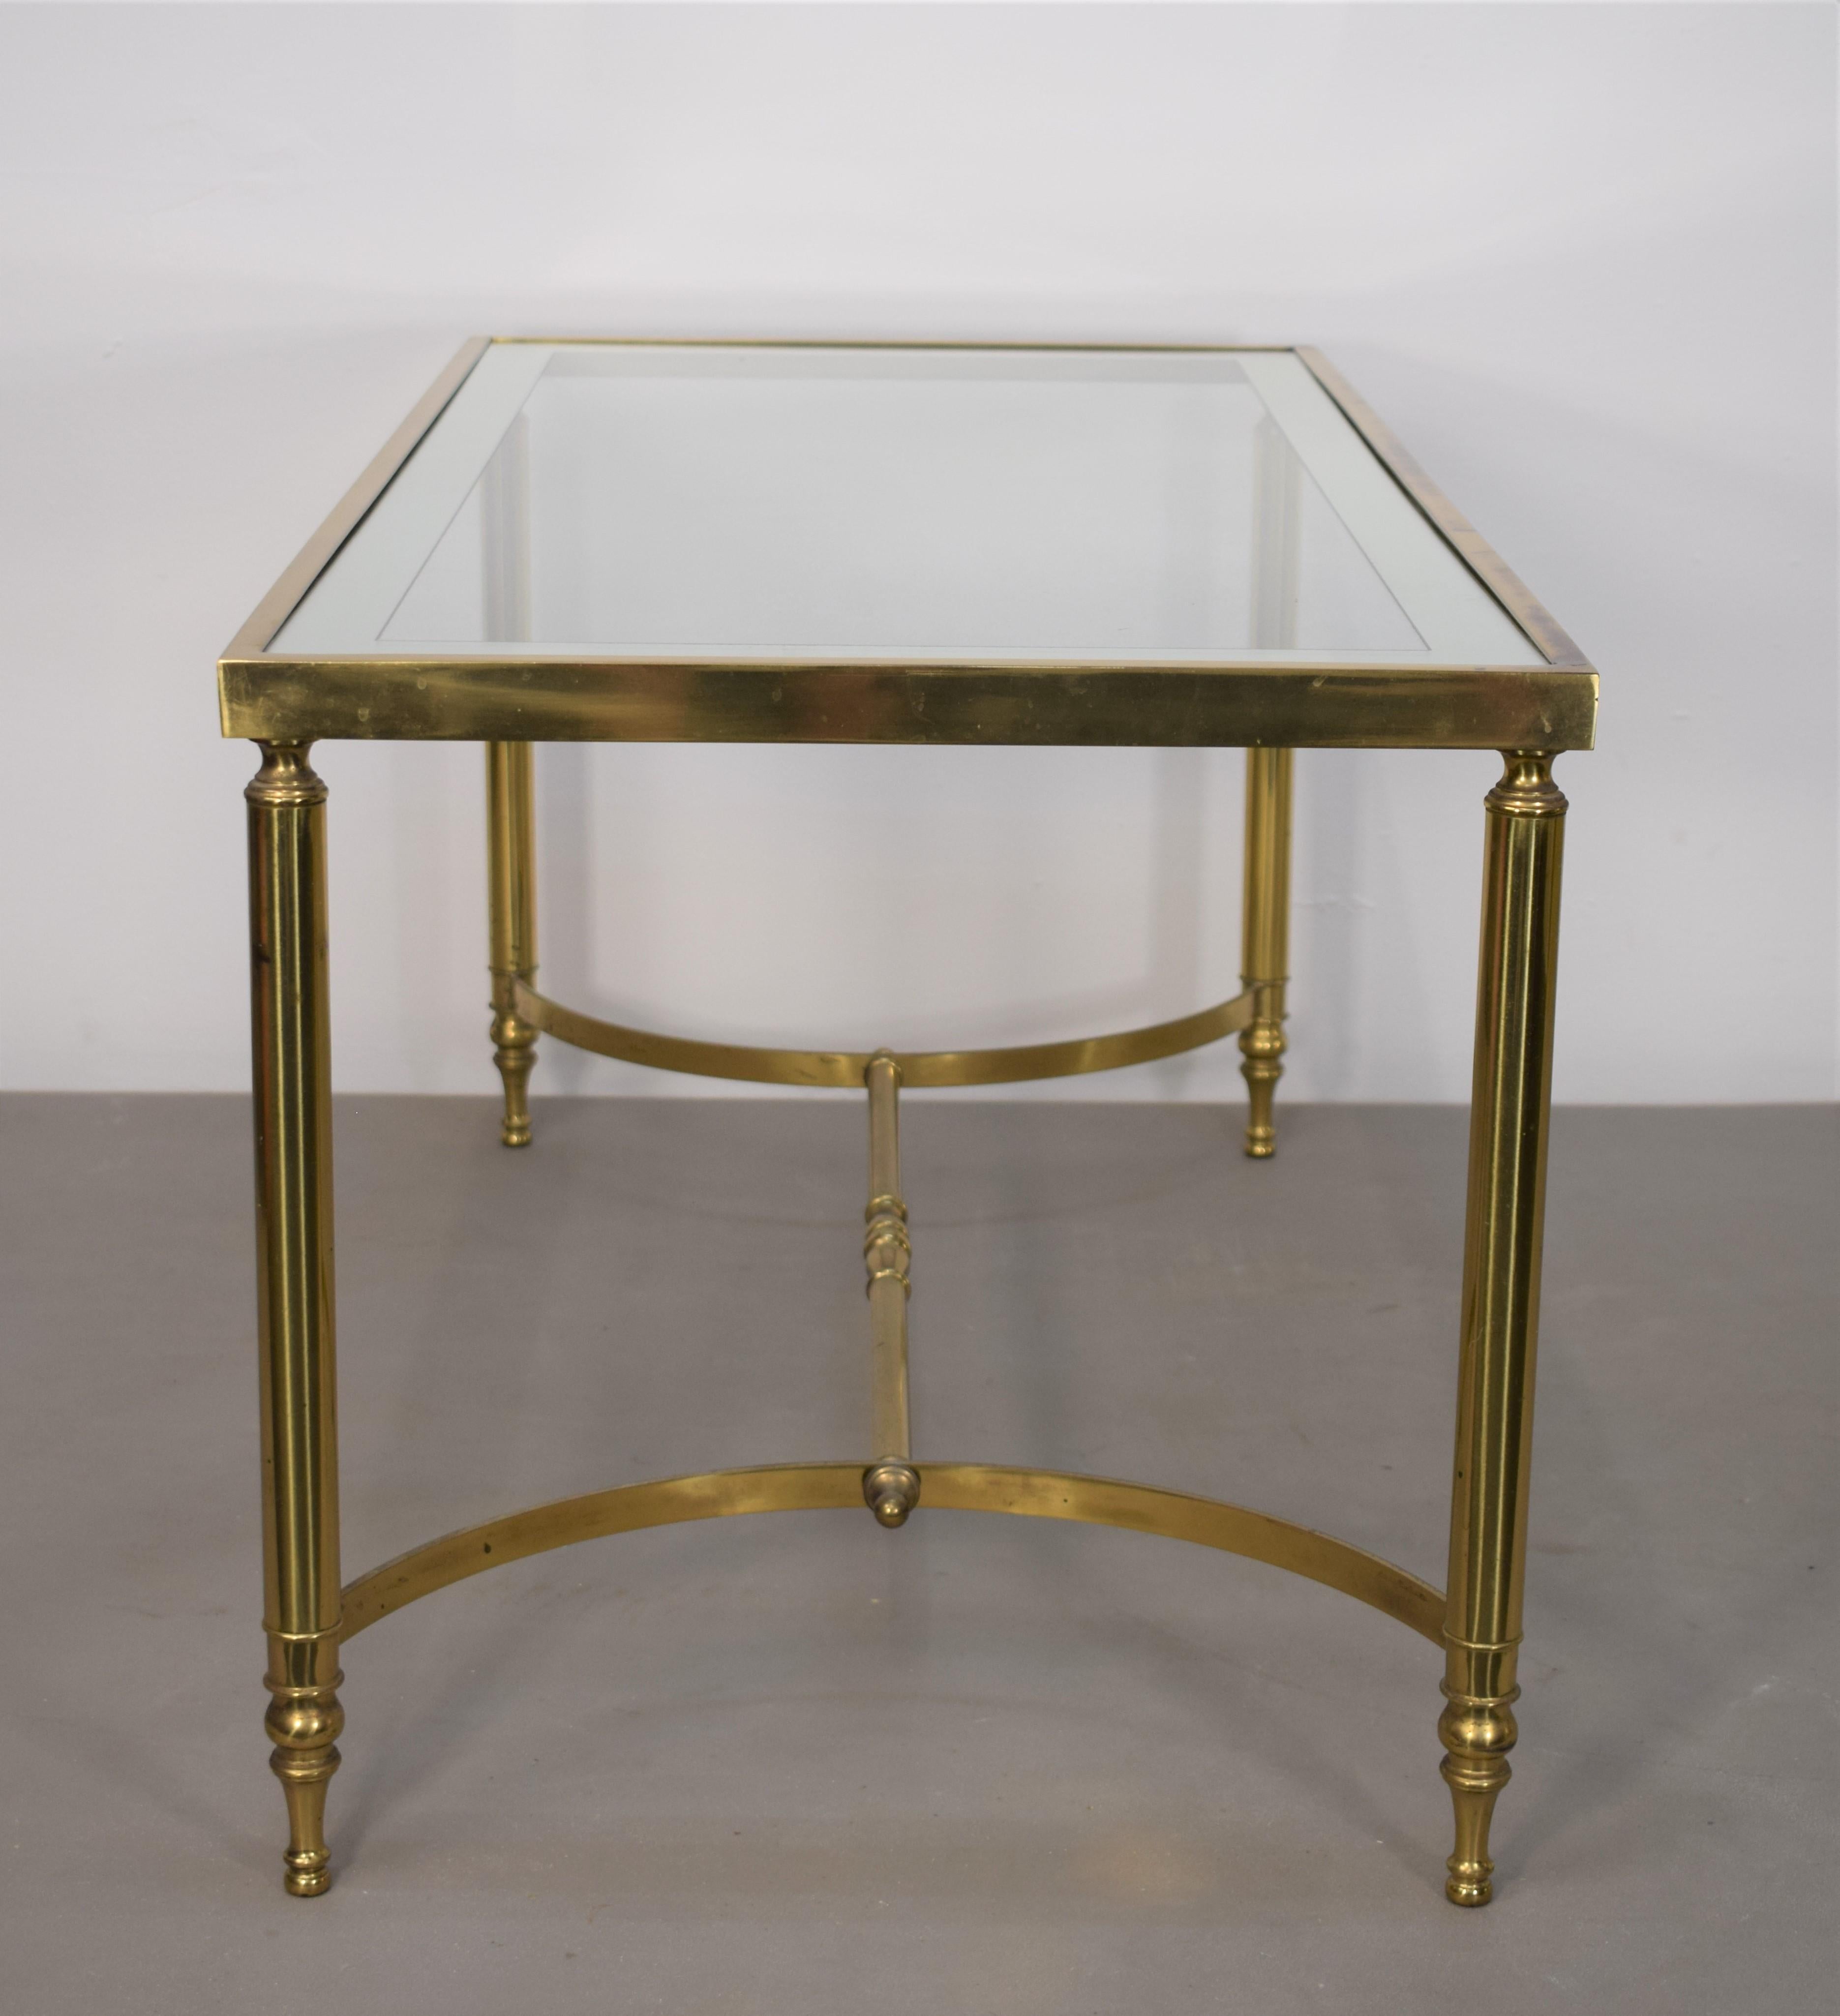 Mid-20th Century Italian Coffee Table, Brass and Glass, 1960s